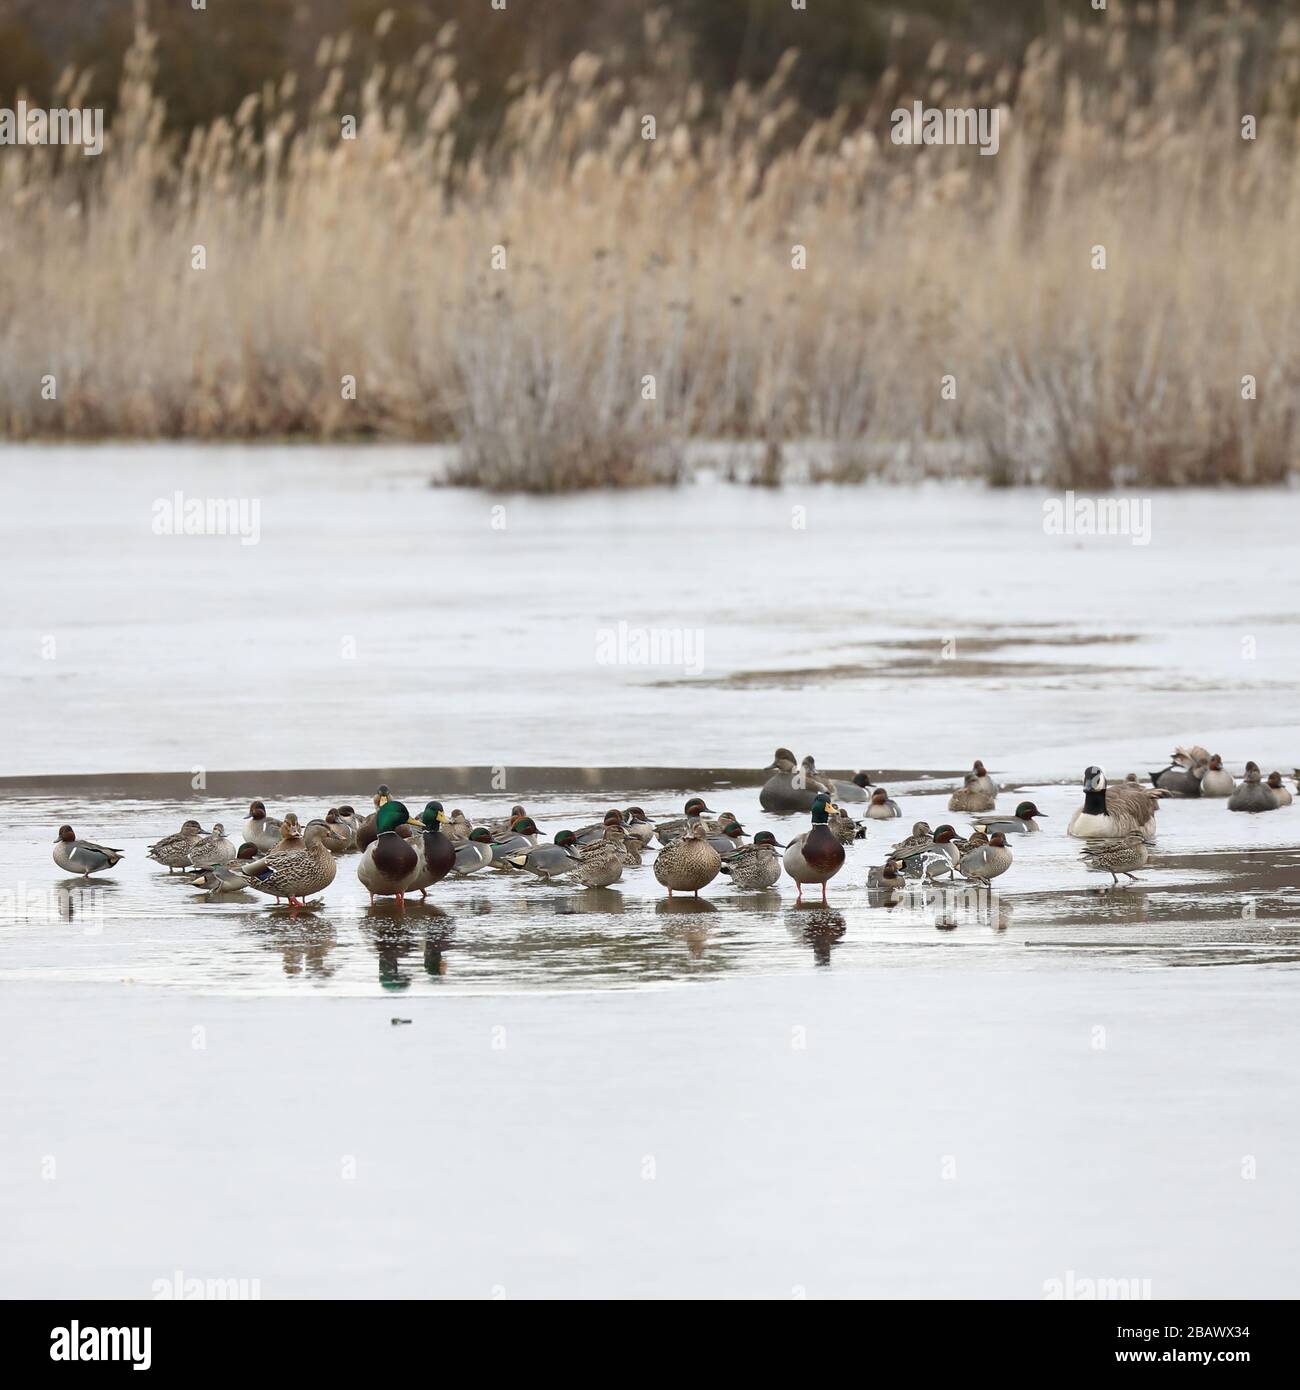 Several winter duck species gathered in the lake during a below zero day Stock Photo